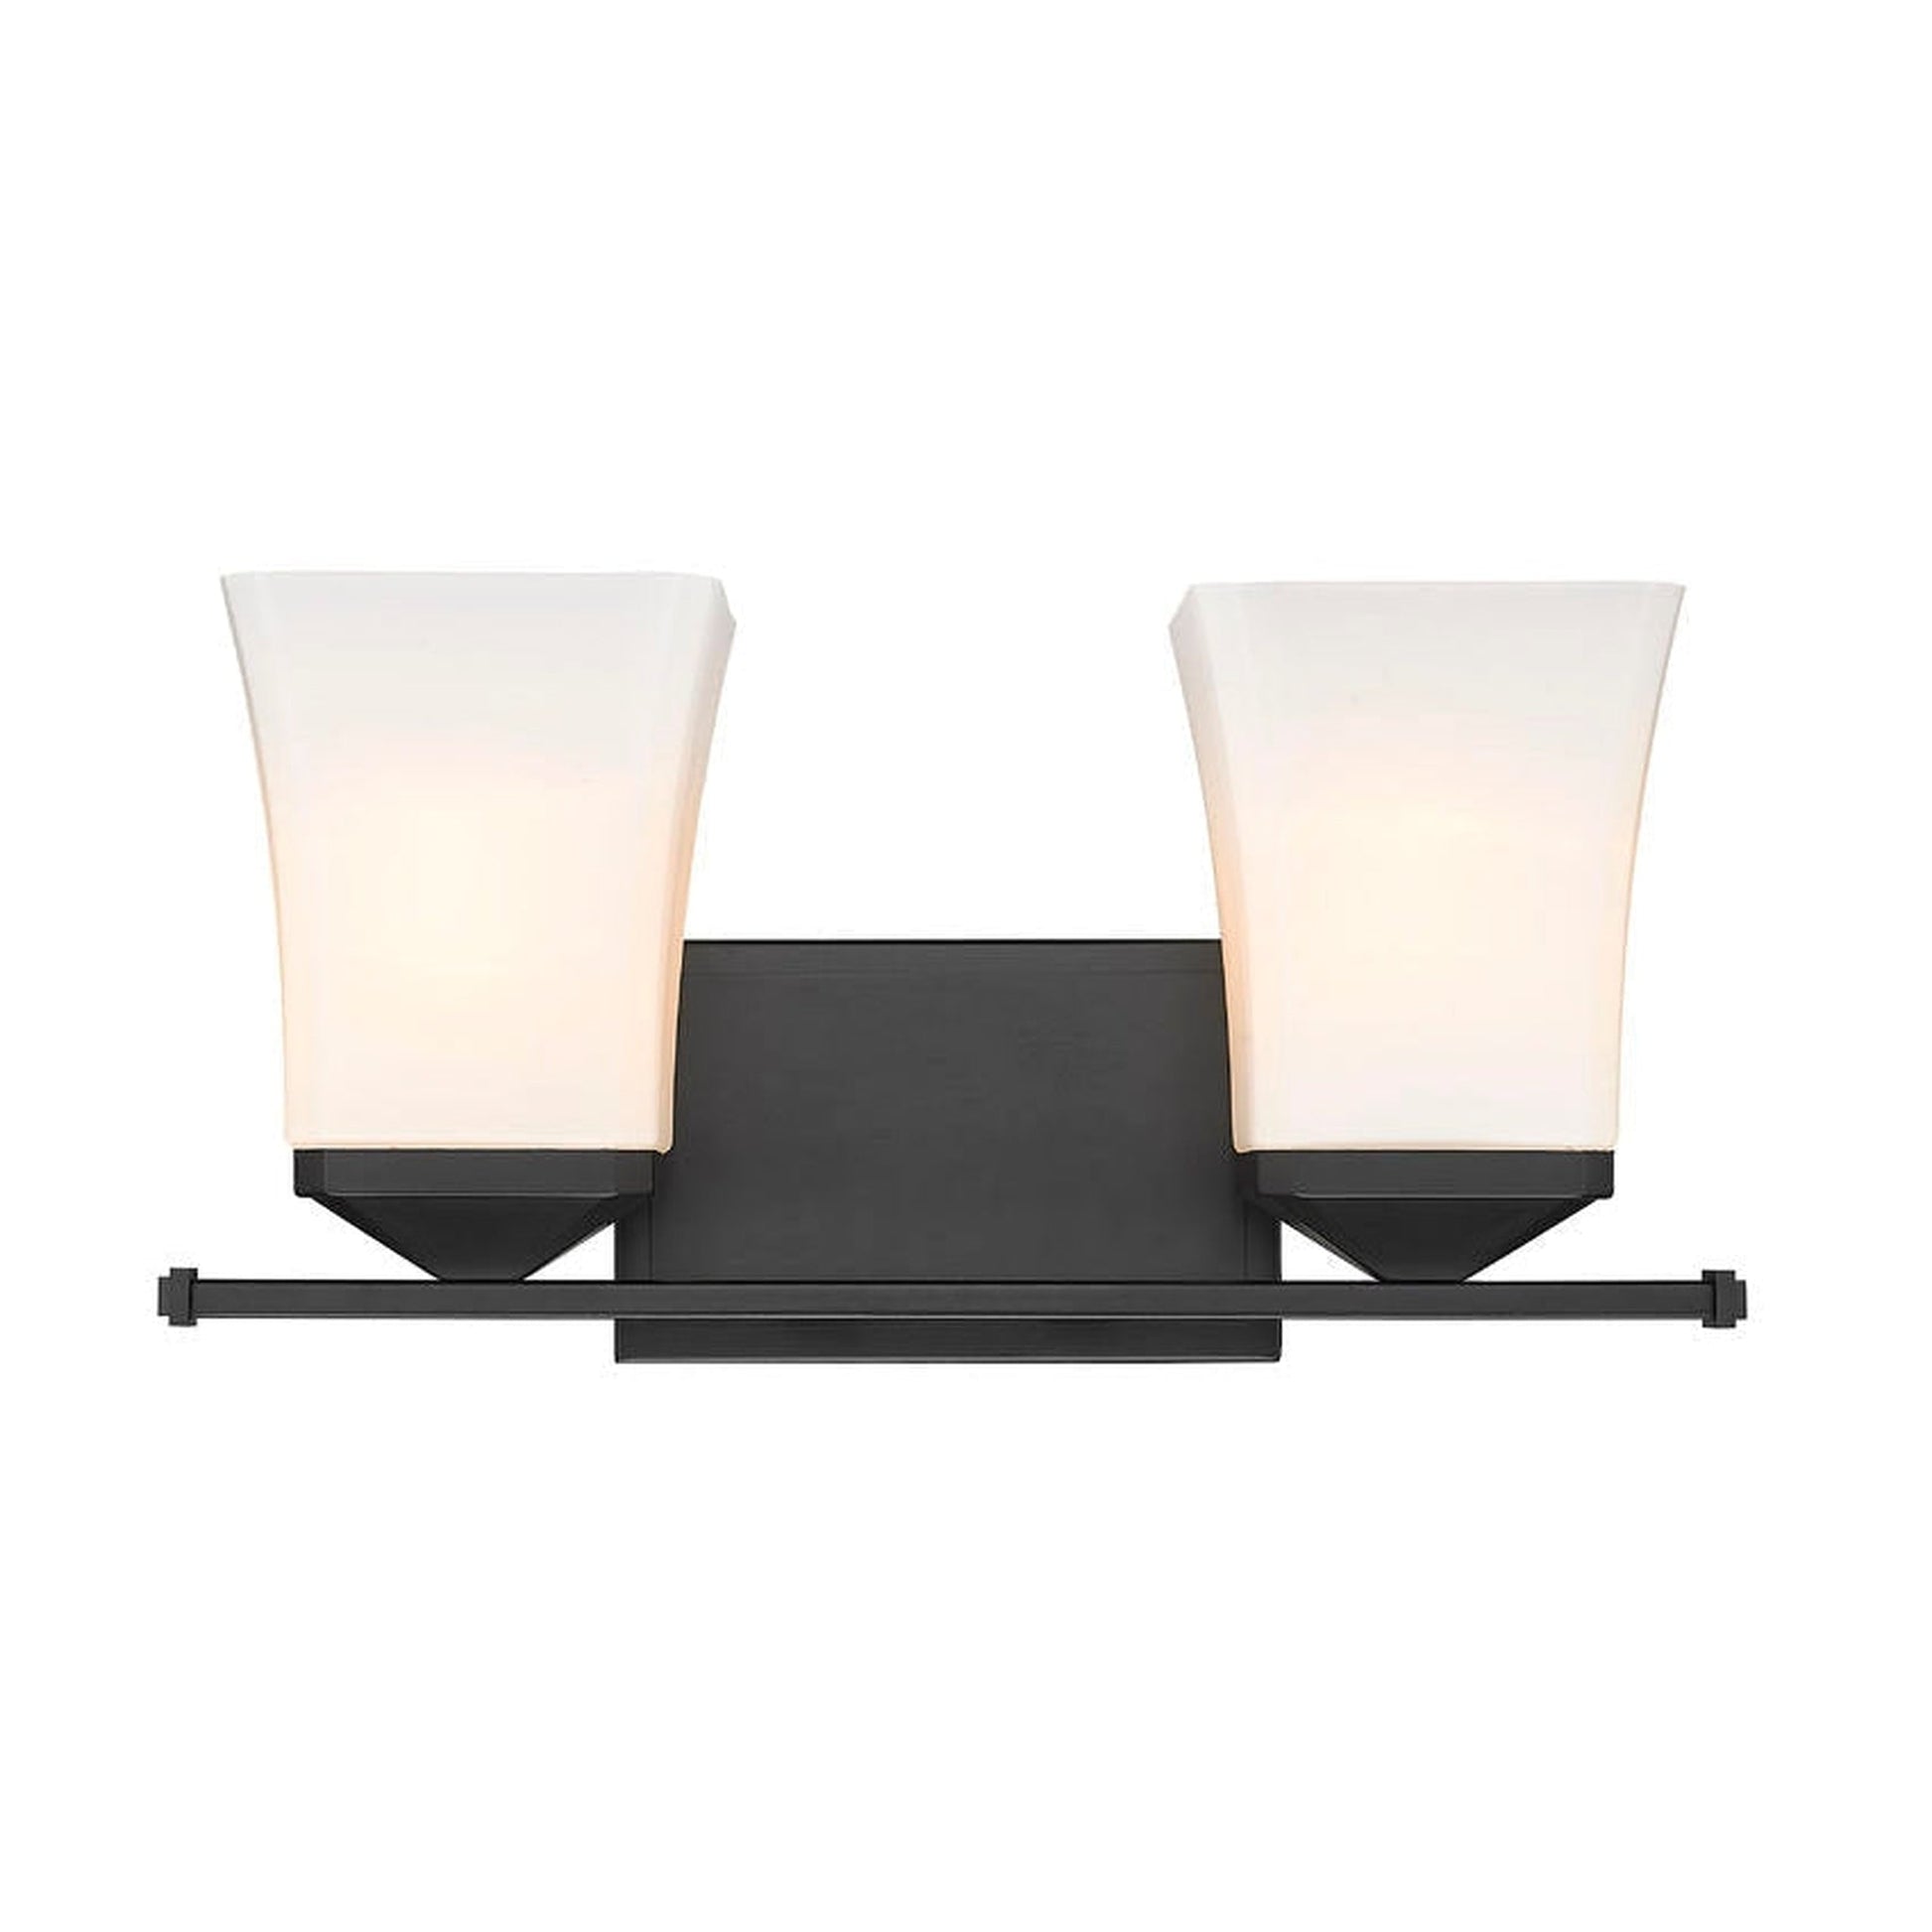 Z-Lite Darcy 16" 2-Light Matte Black Vanity Light With Etched Opal Glass Shade